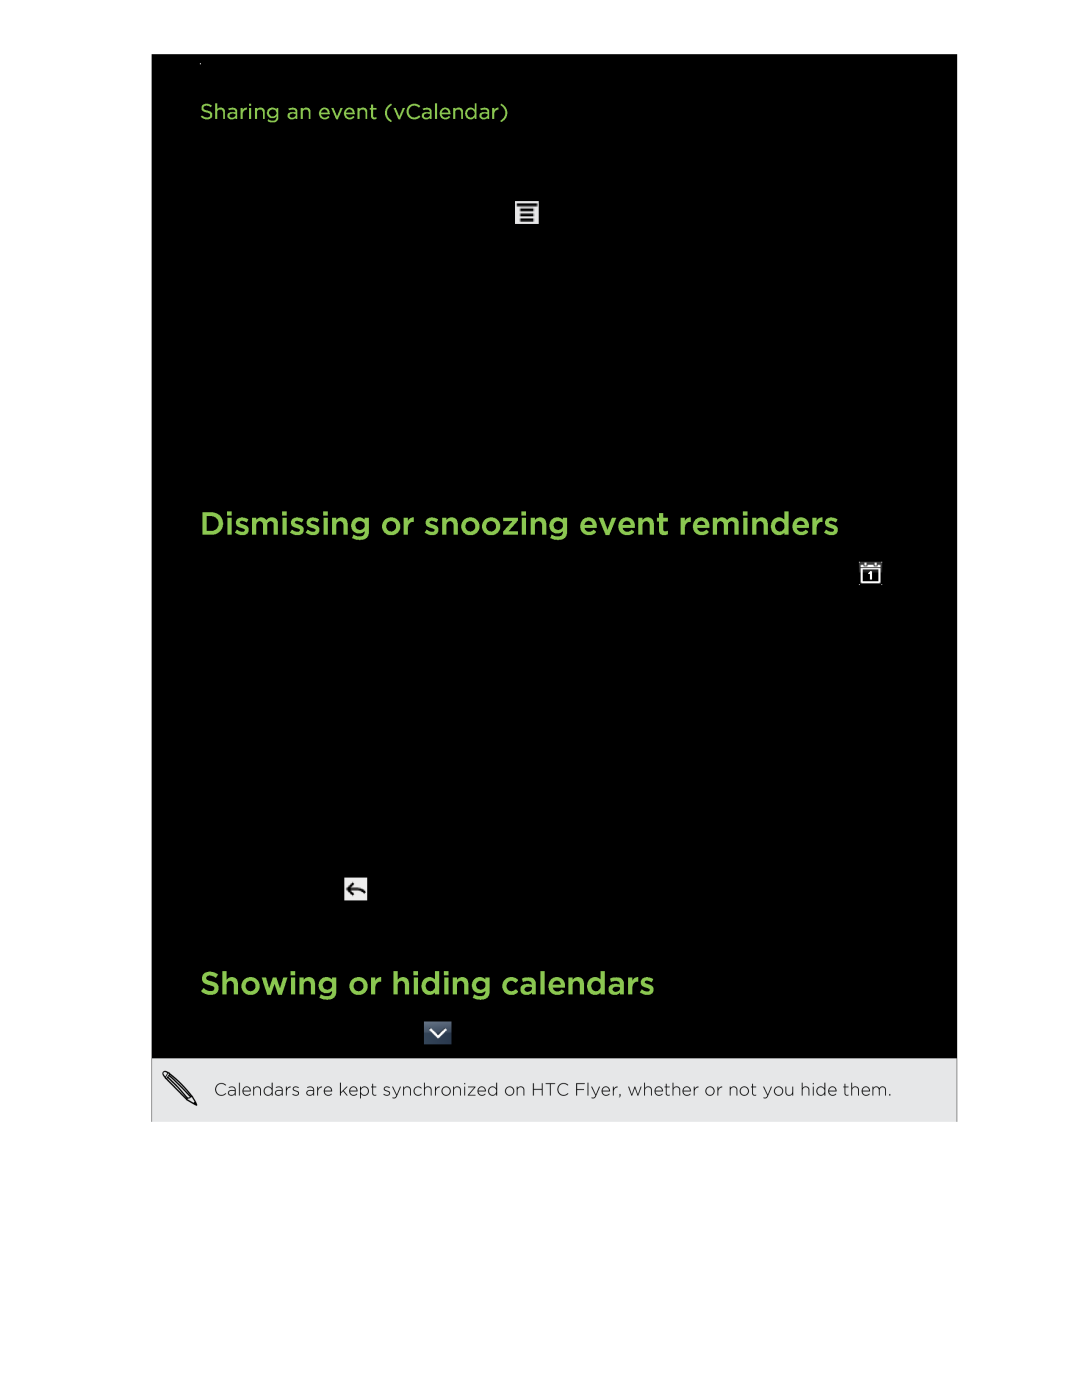 HTC HTCFlyerP512 manual Dismissing or snoozing event reminders, Showing or hiding calendars, Sharing an event vCalendar 